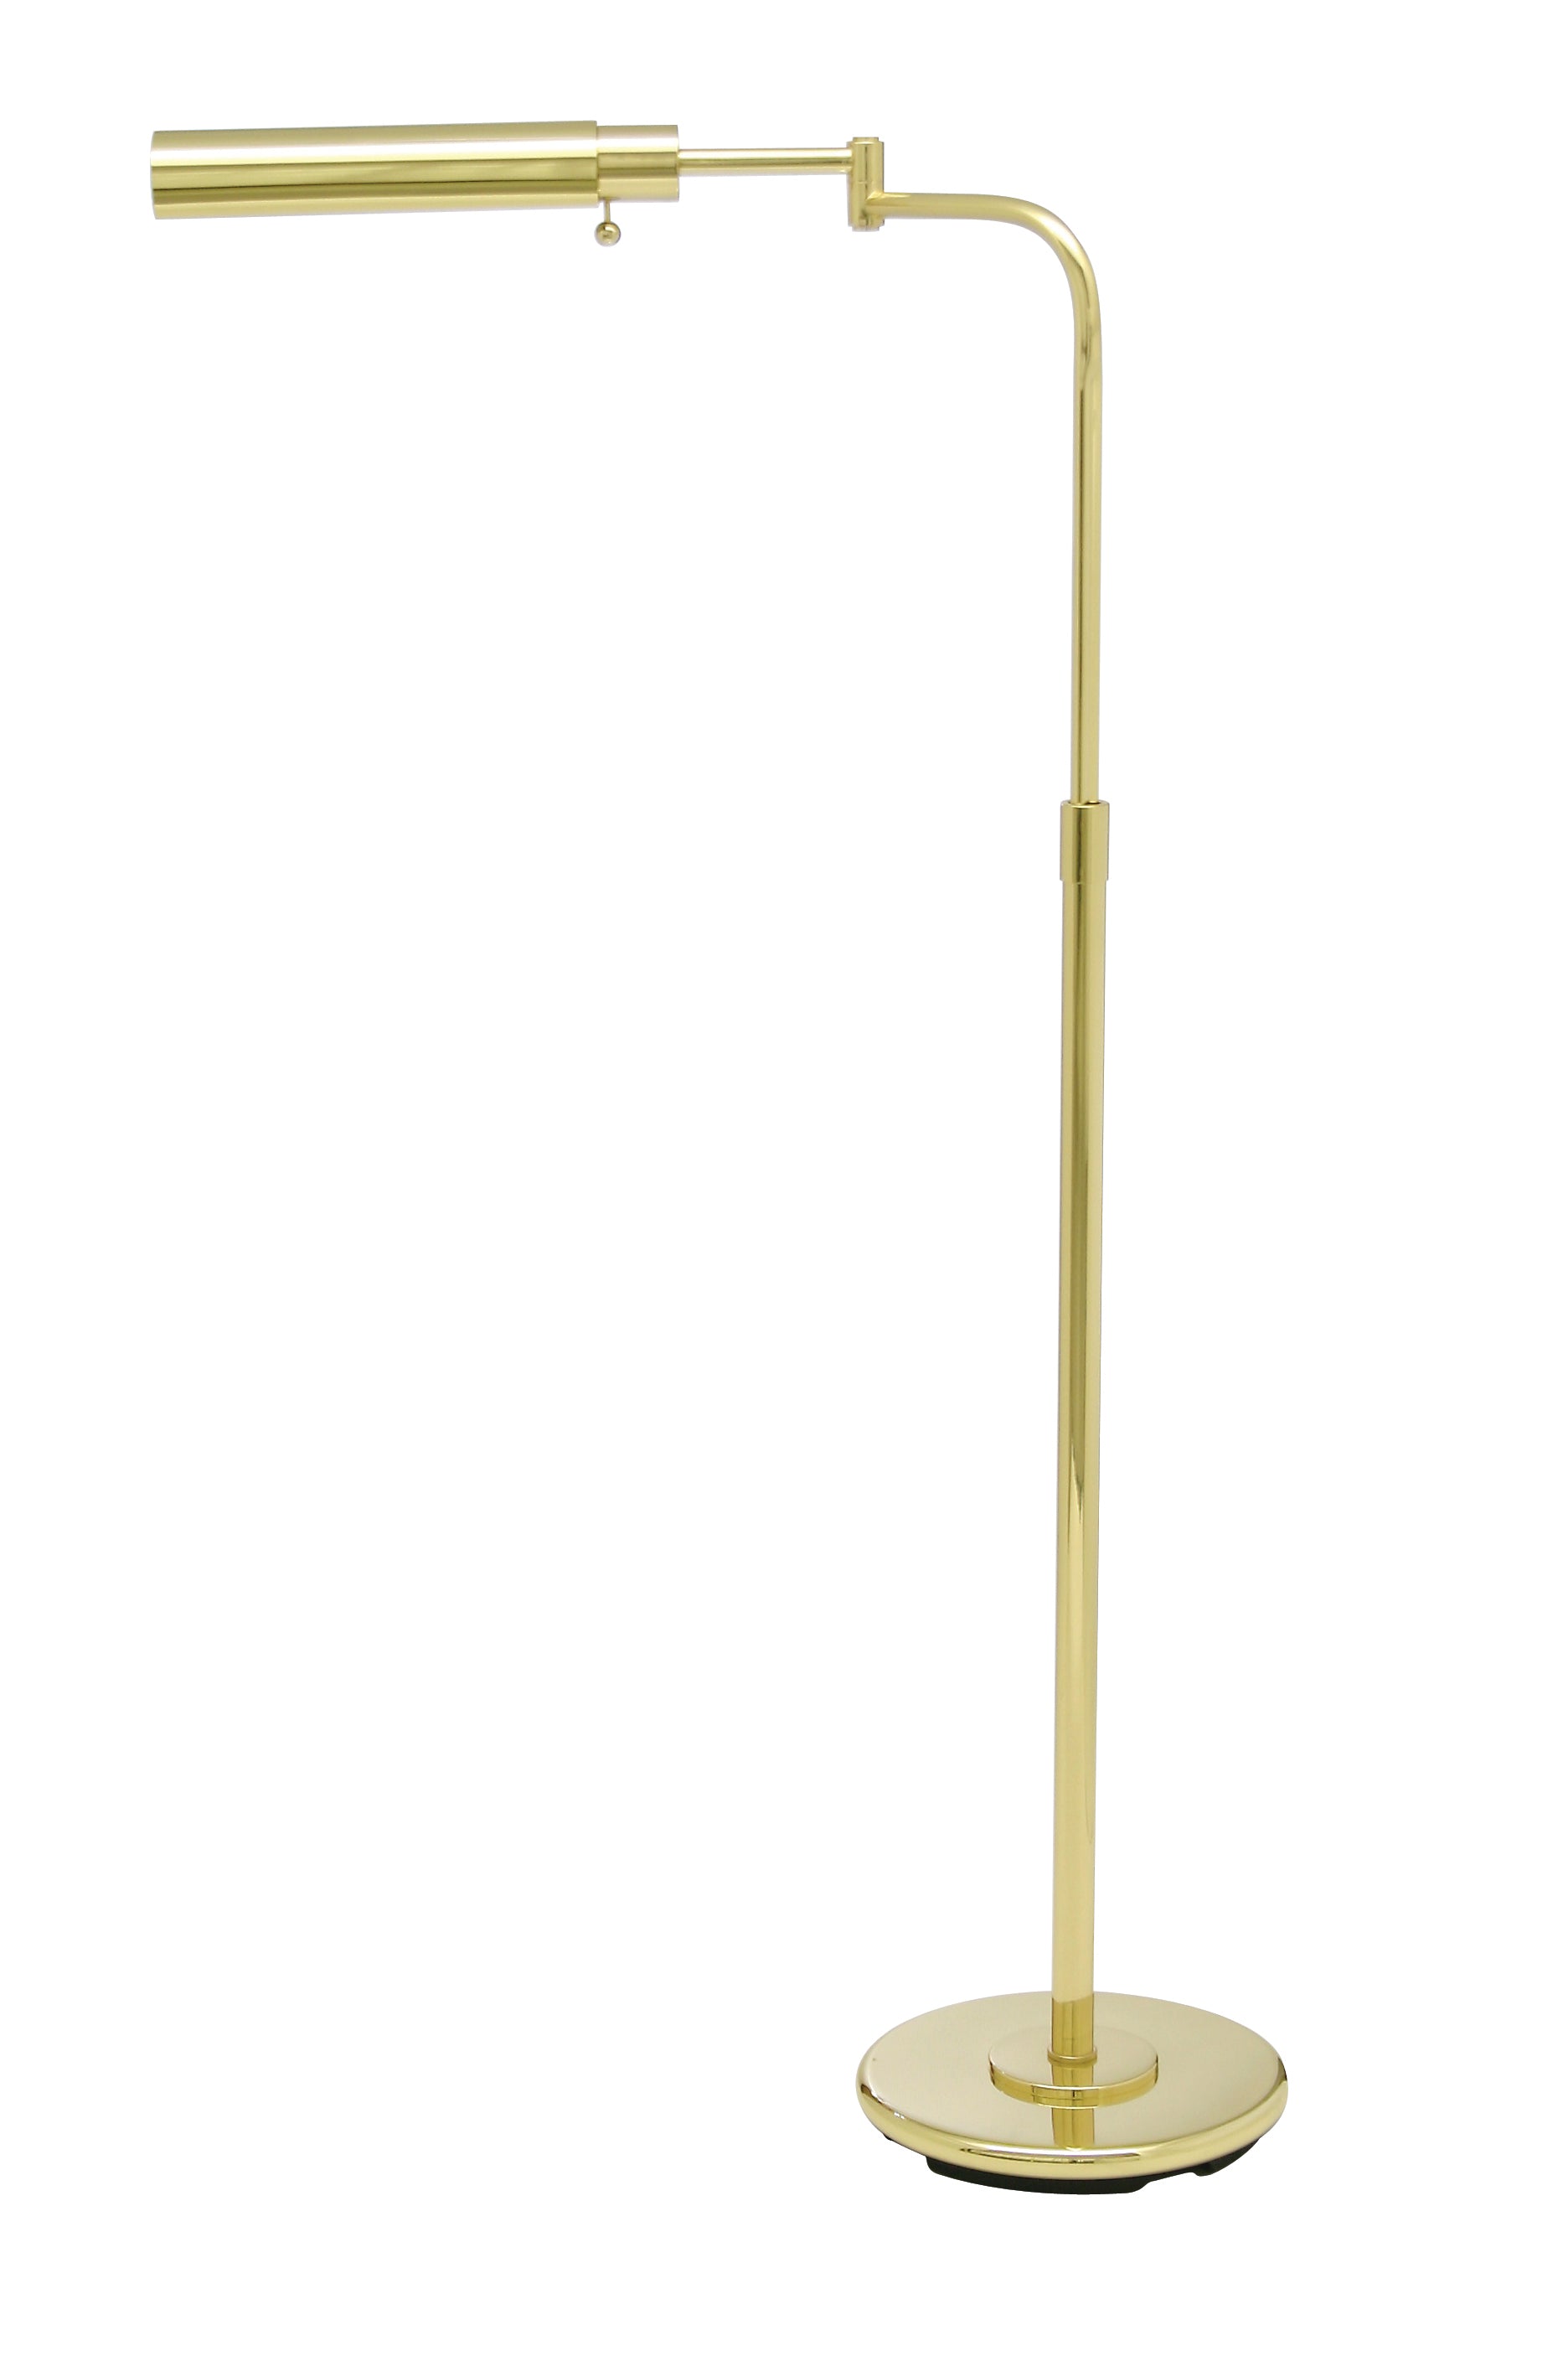 House of Troy Home/Office Polished Brass Floor Lamp PH100-61-F